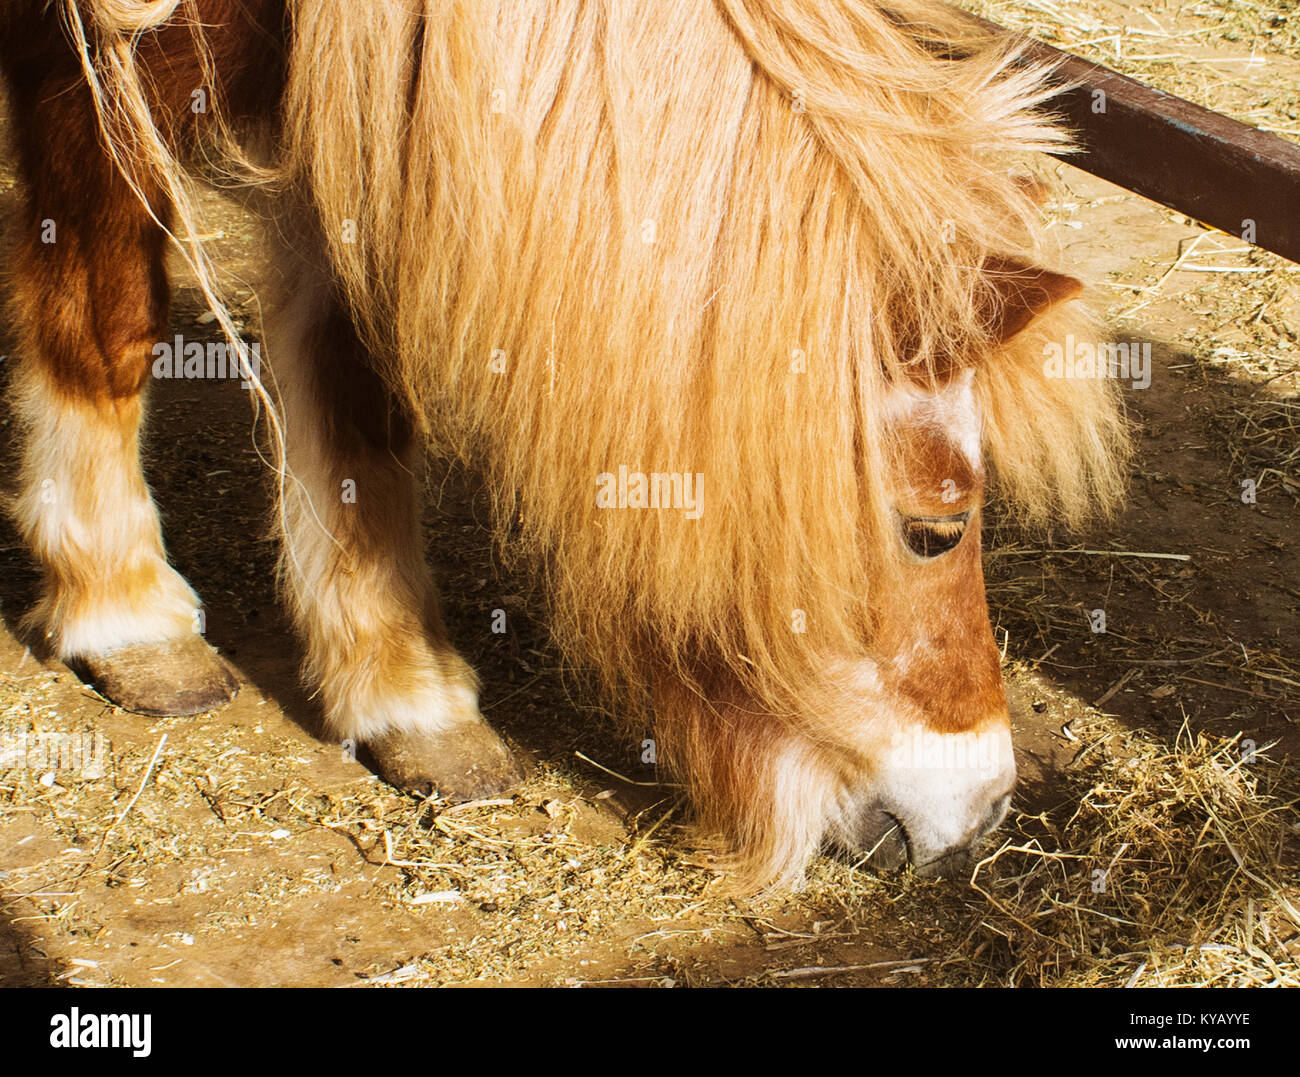 A close-up shot of a local Shetland Pony during feeding time. Stock Photo